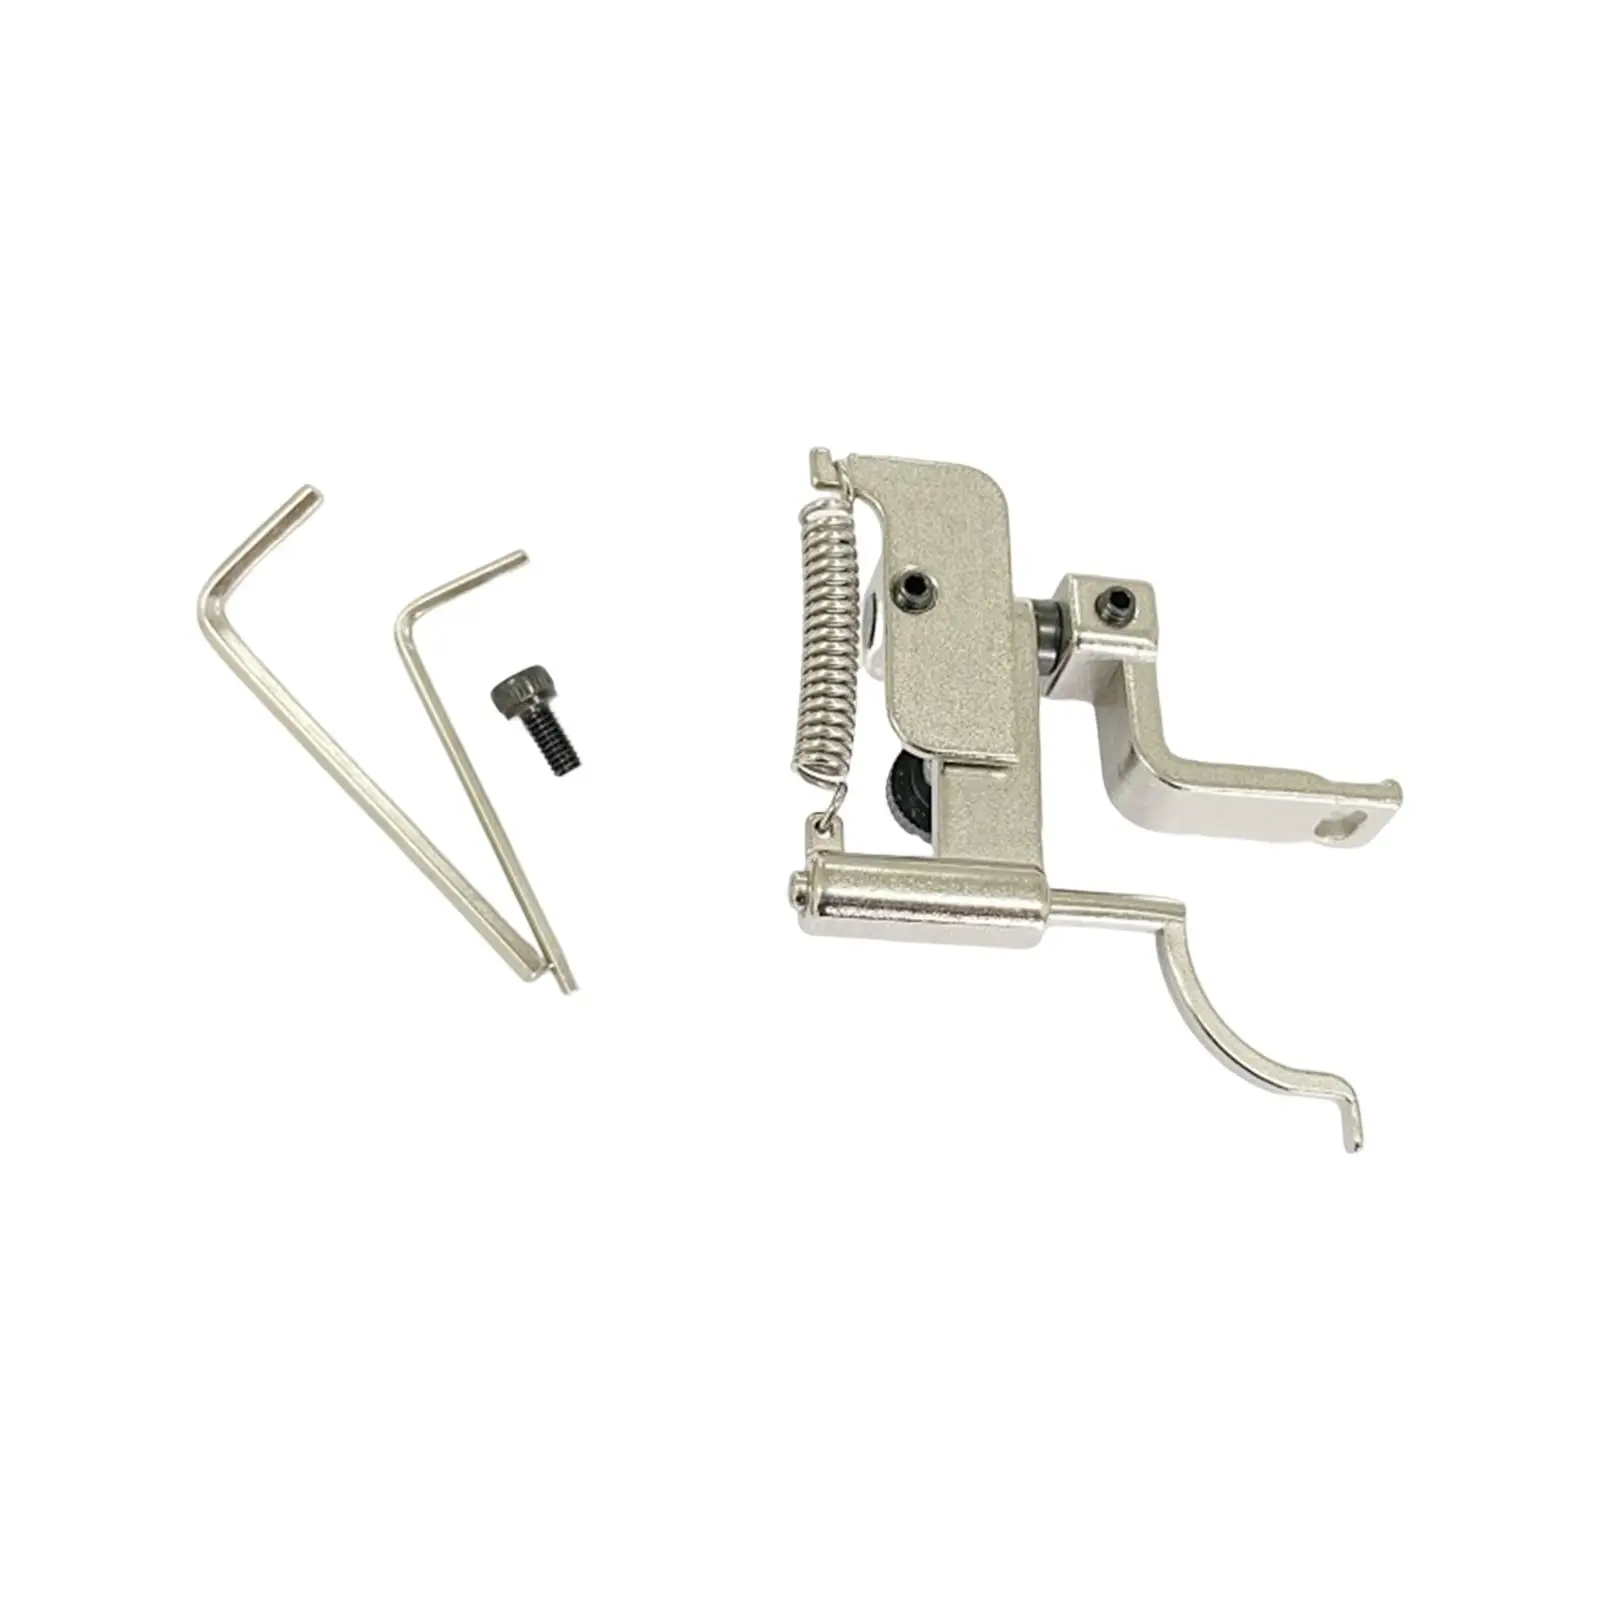 Suspended Edge Guide Locator Edge Guide with Mounting Screws Presser for 891